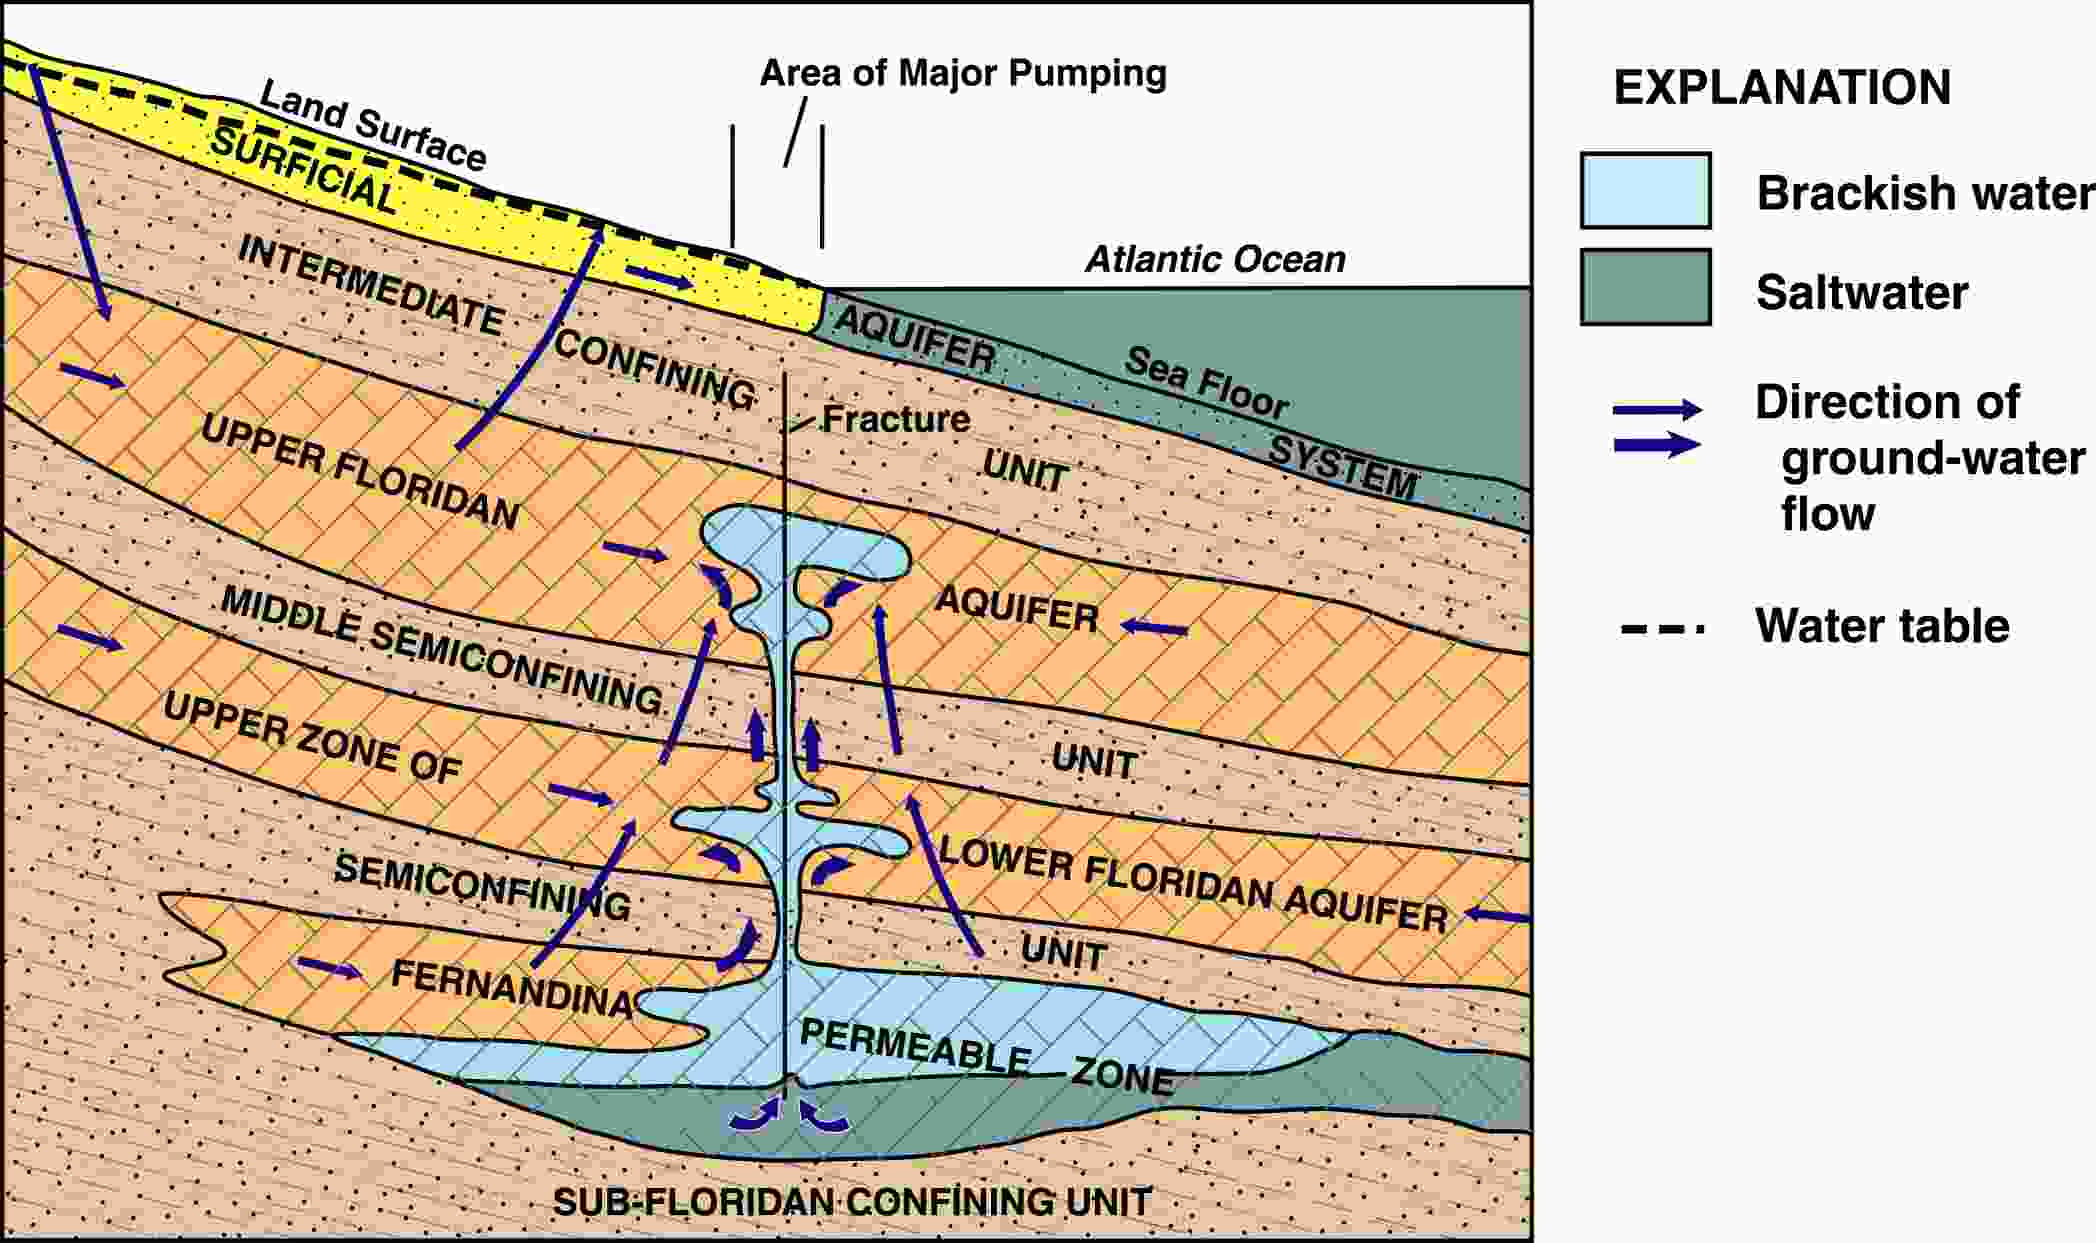 Vertical movement of saline water in the Floridan aquifer system